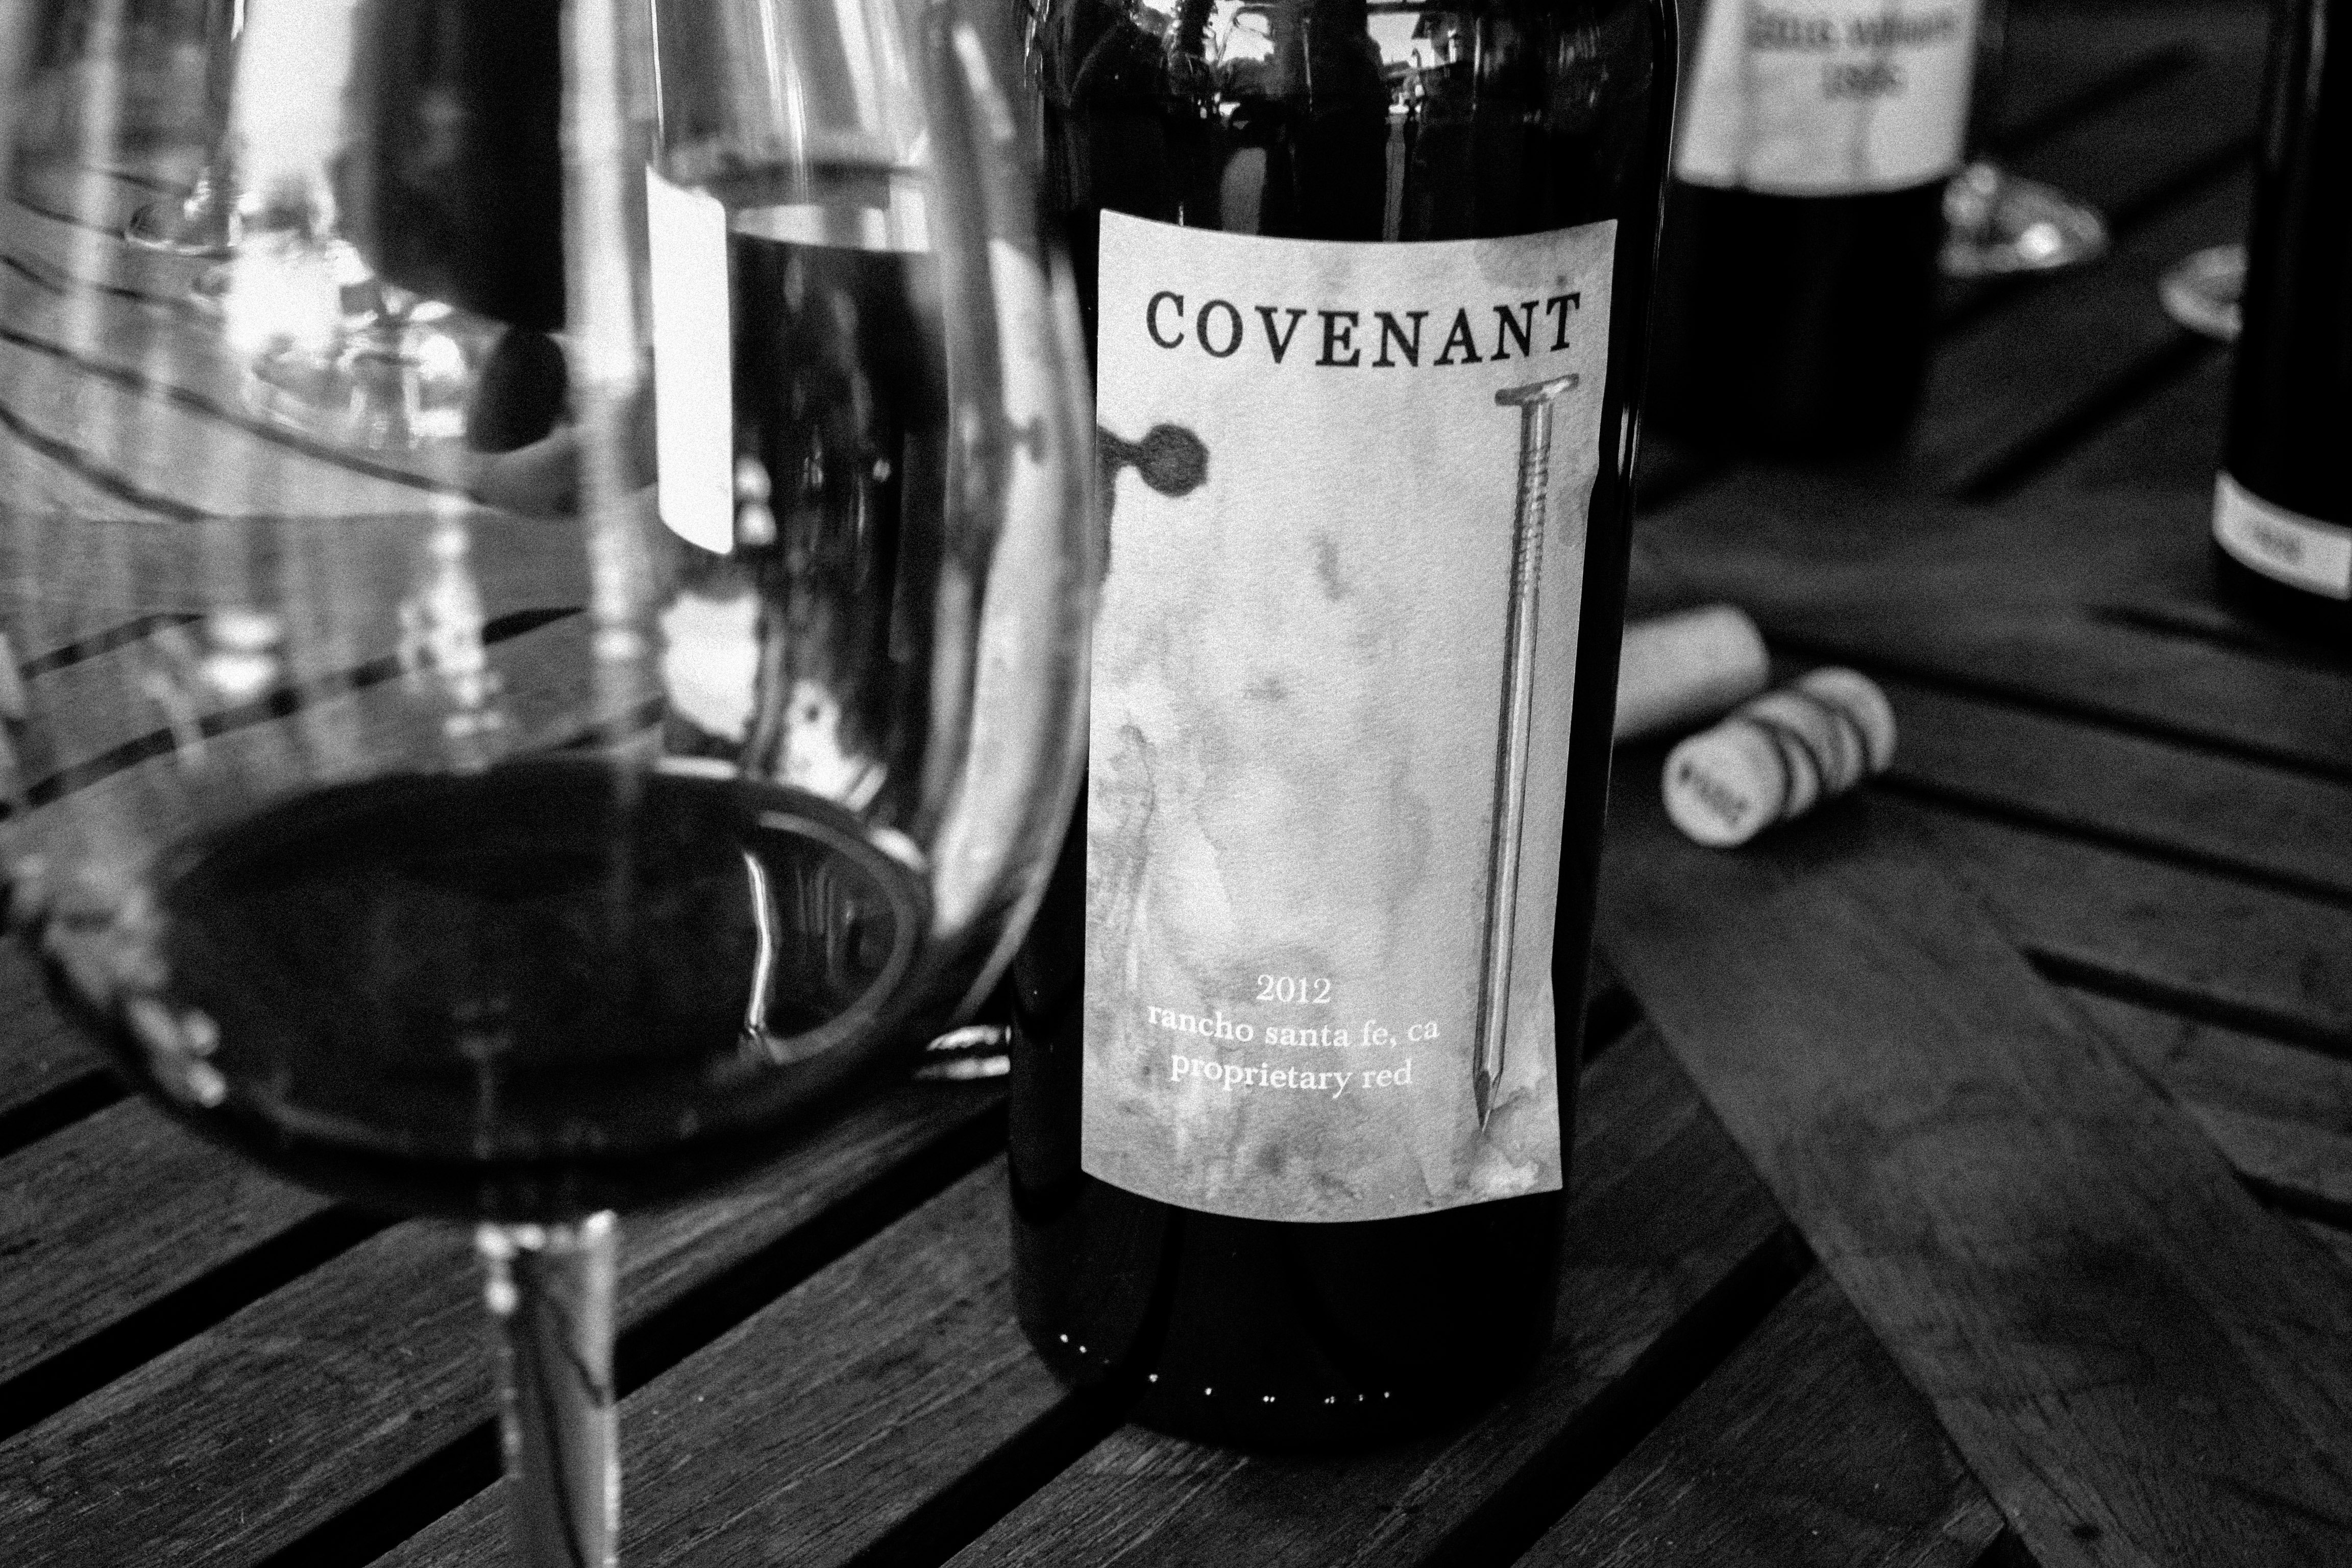 2015 - With guidance from Steve Ernst and art by Leonard Hardtke, our first vintage, the 2012, is released for sale in the best restaurants of San Diego under the name Covenant.
